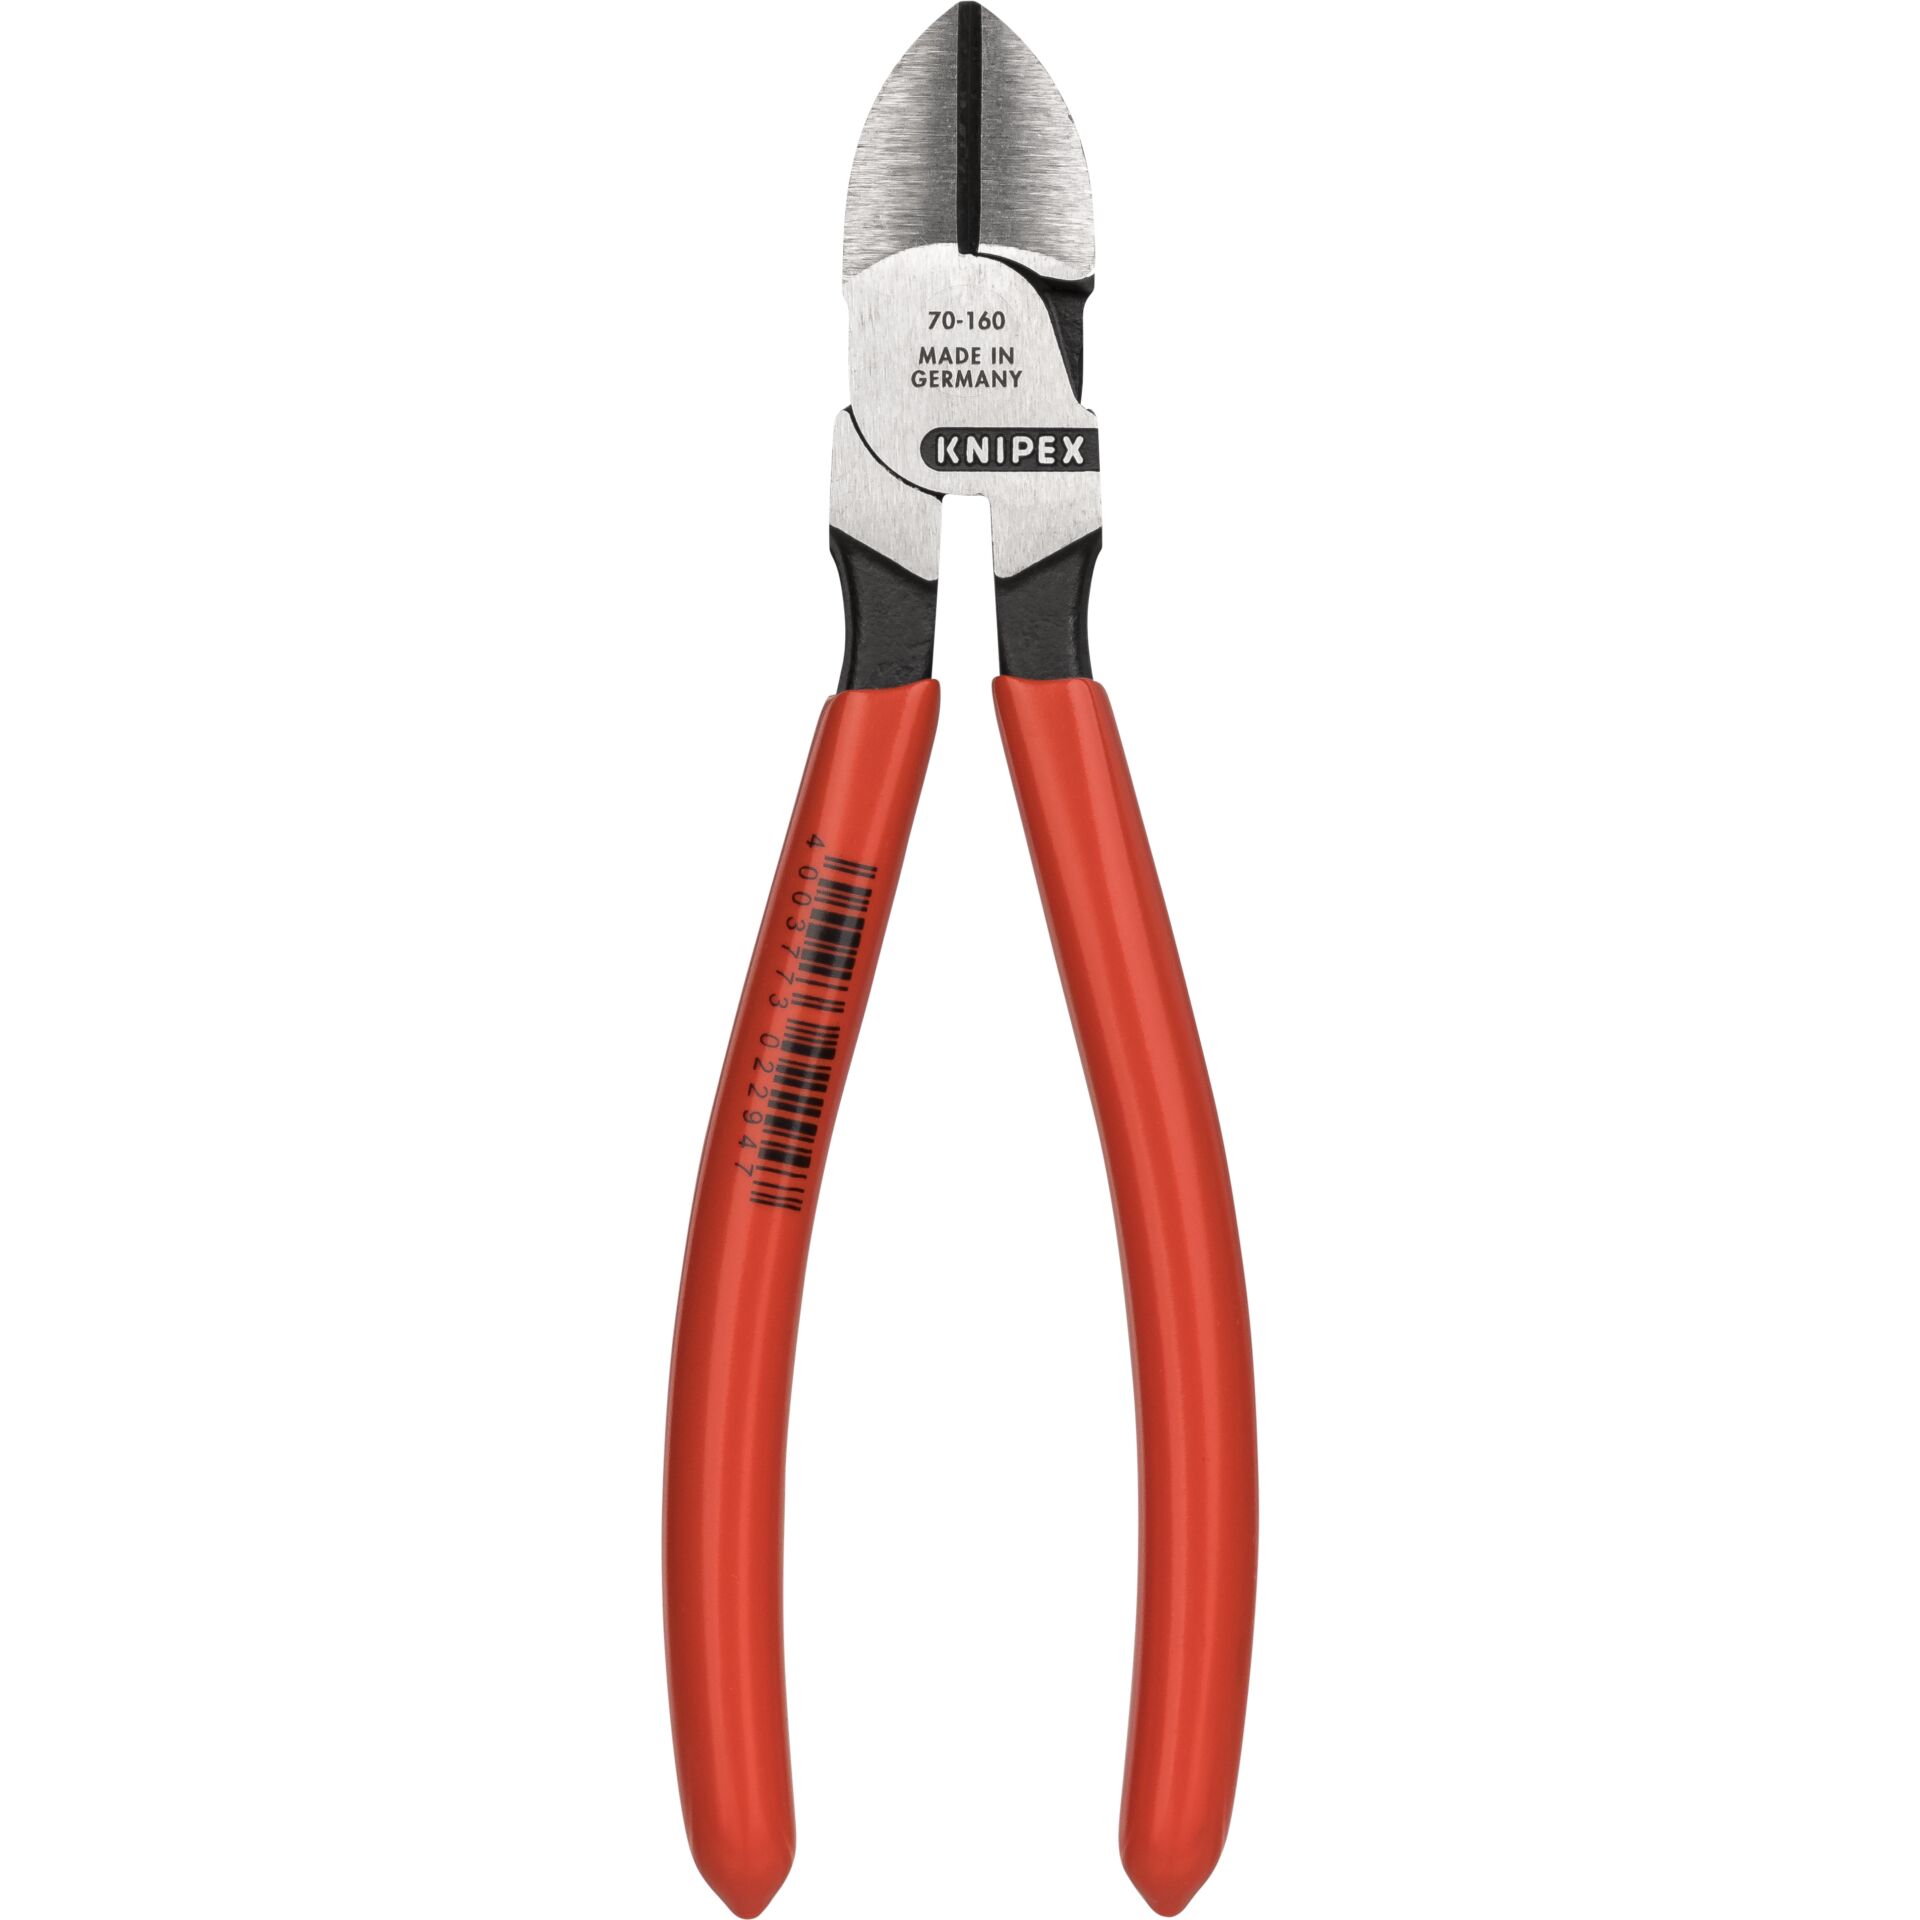 KNIPEX tronchese laterale